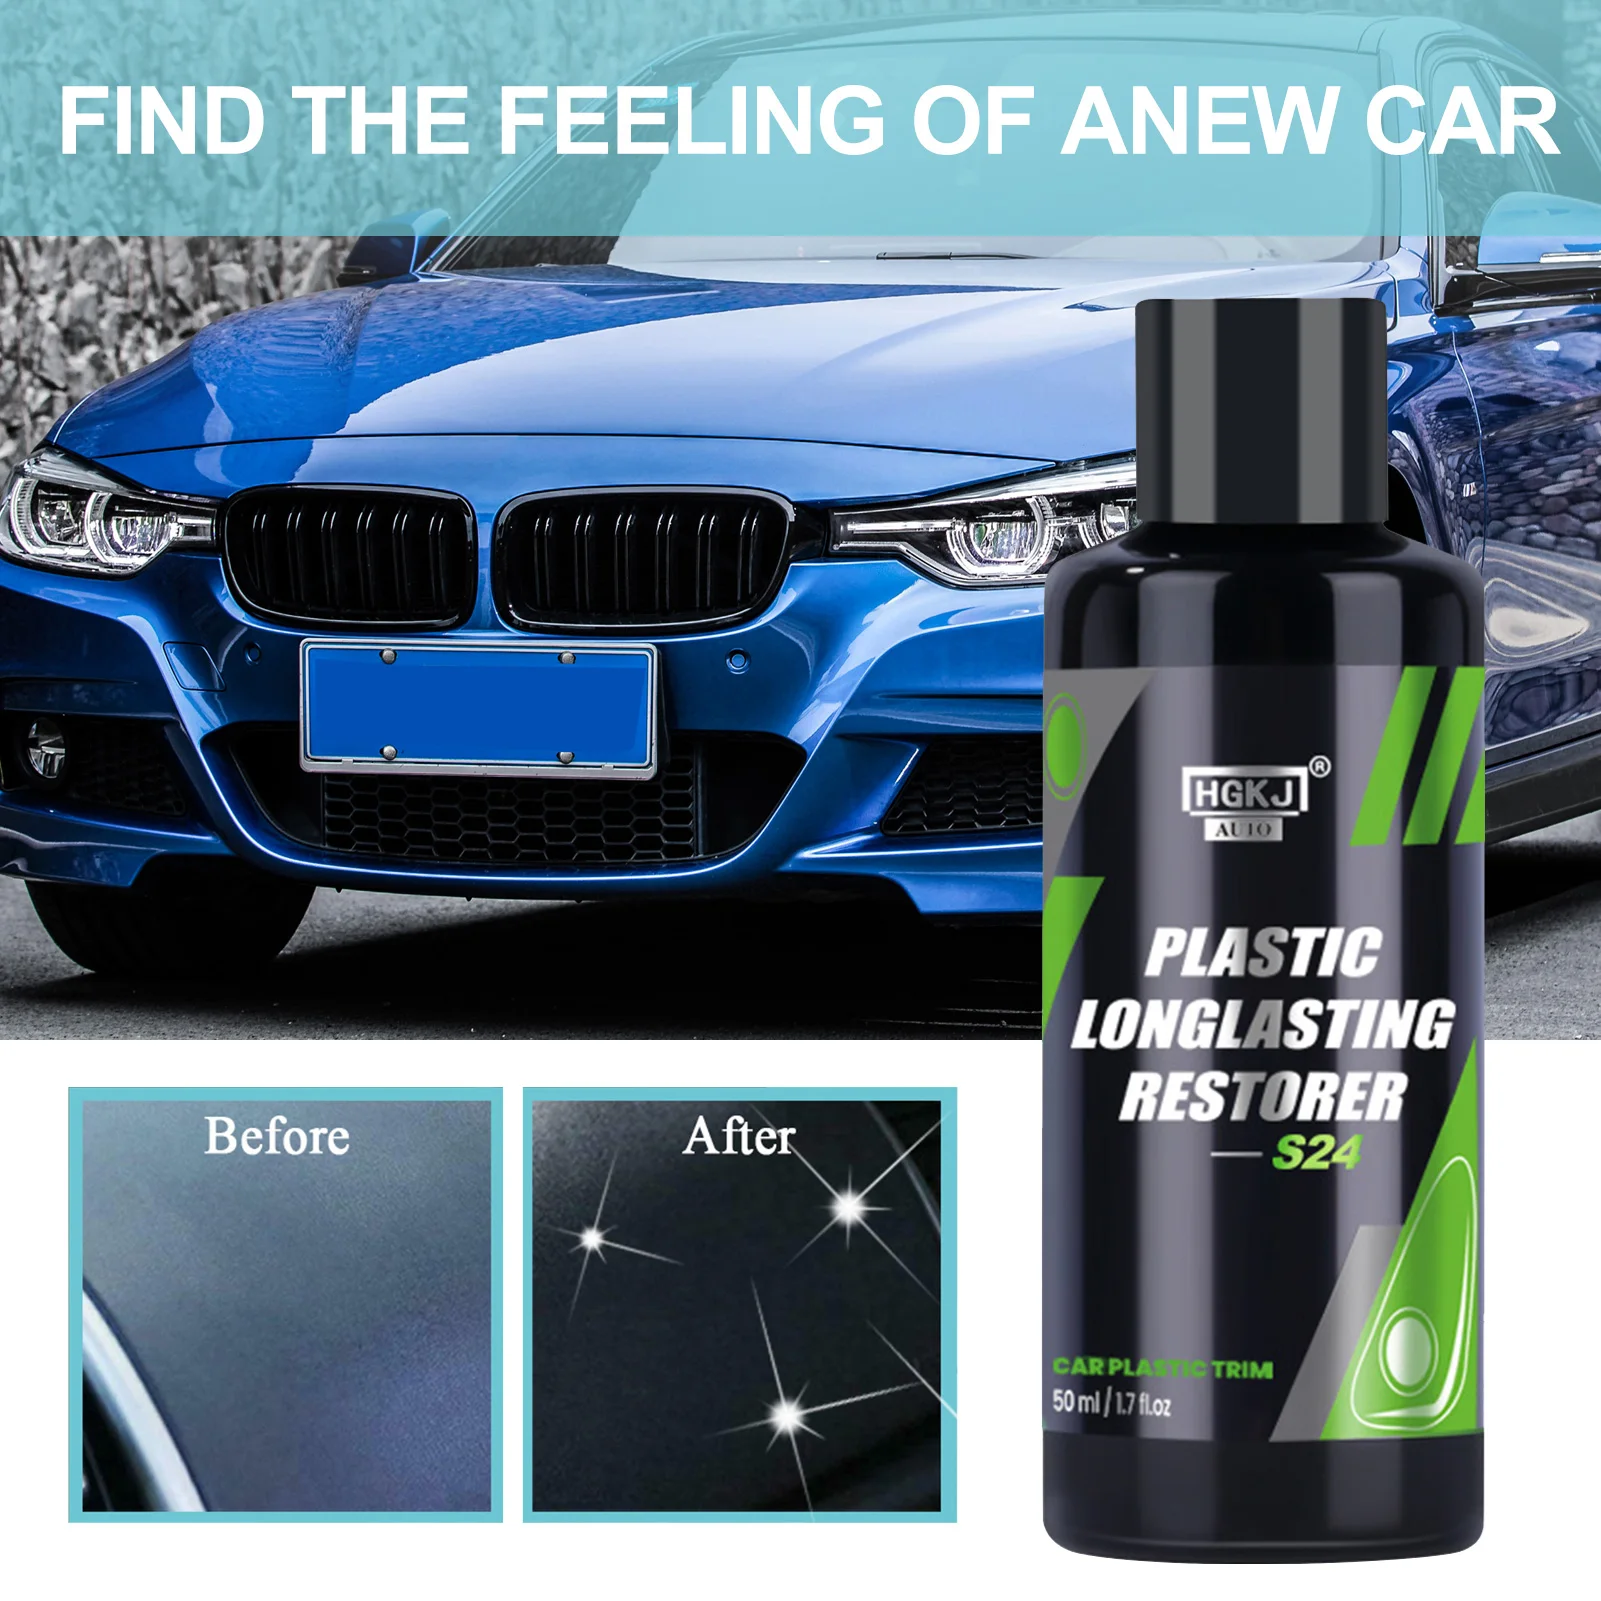 

Car Refurbishment Cleaning Agent Car Refurbish Agent For Plastics Parts Highly Concentrated Cleaner Remove Stains And Restore